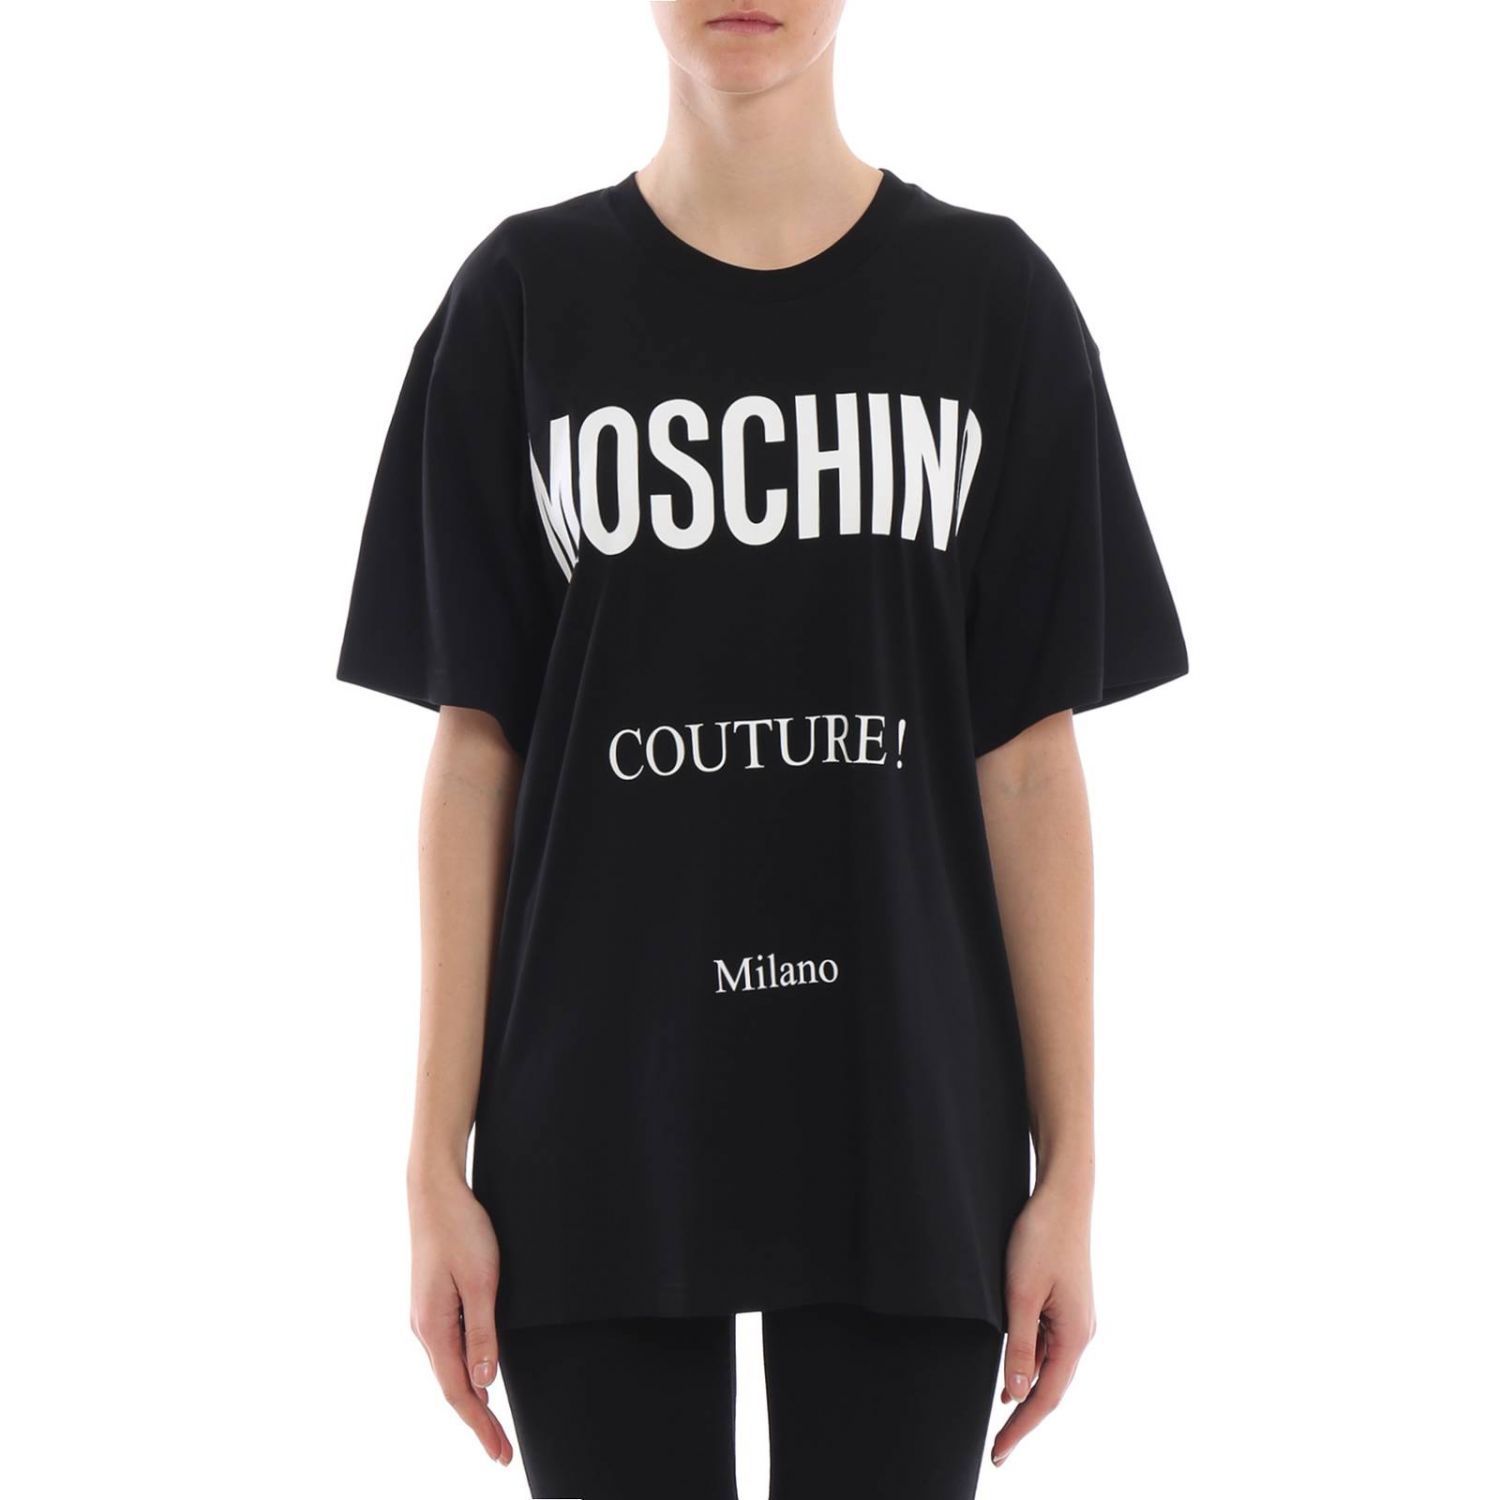 T-Shirt Moschino Couture 0709 540 Giglio EN